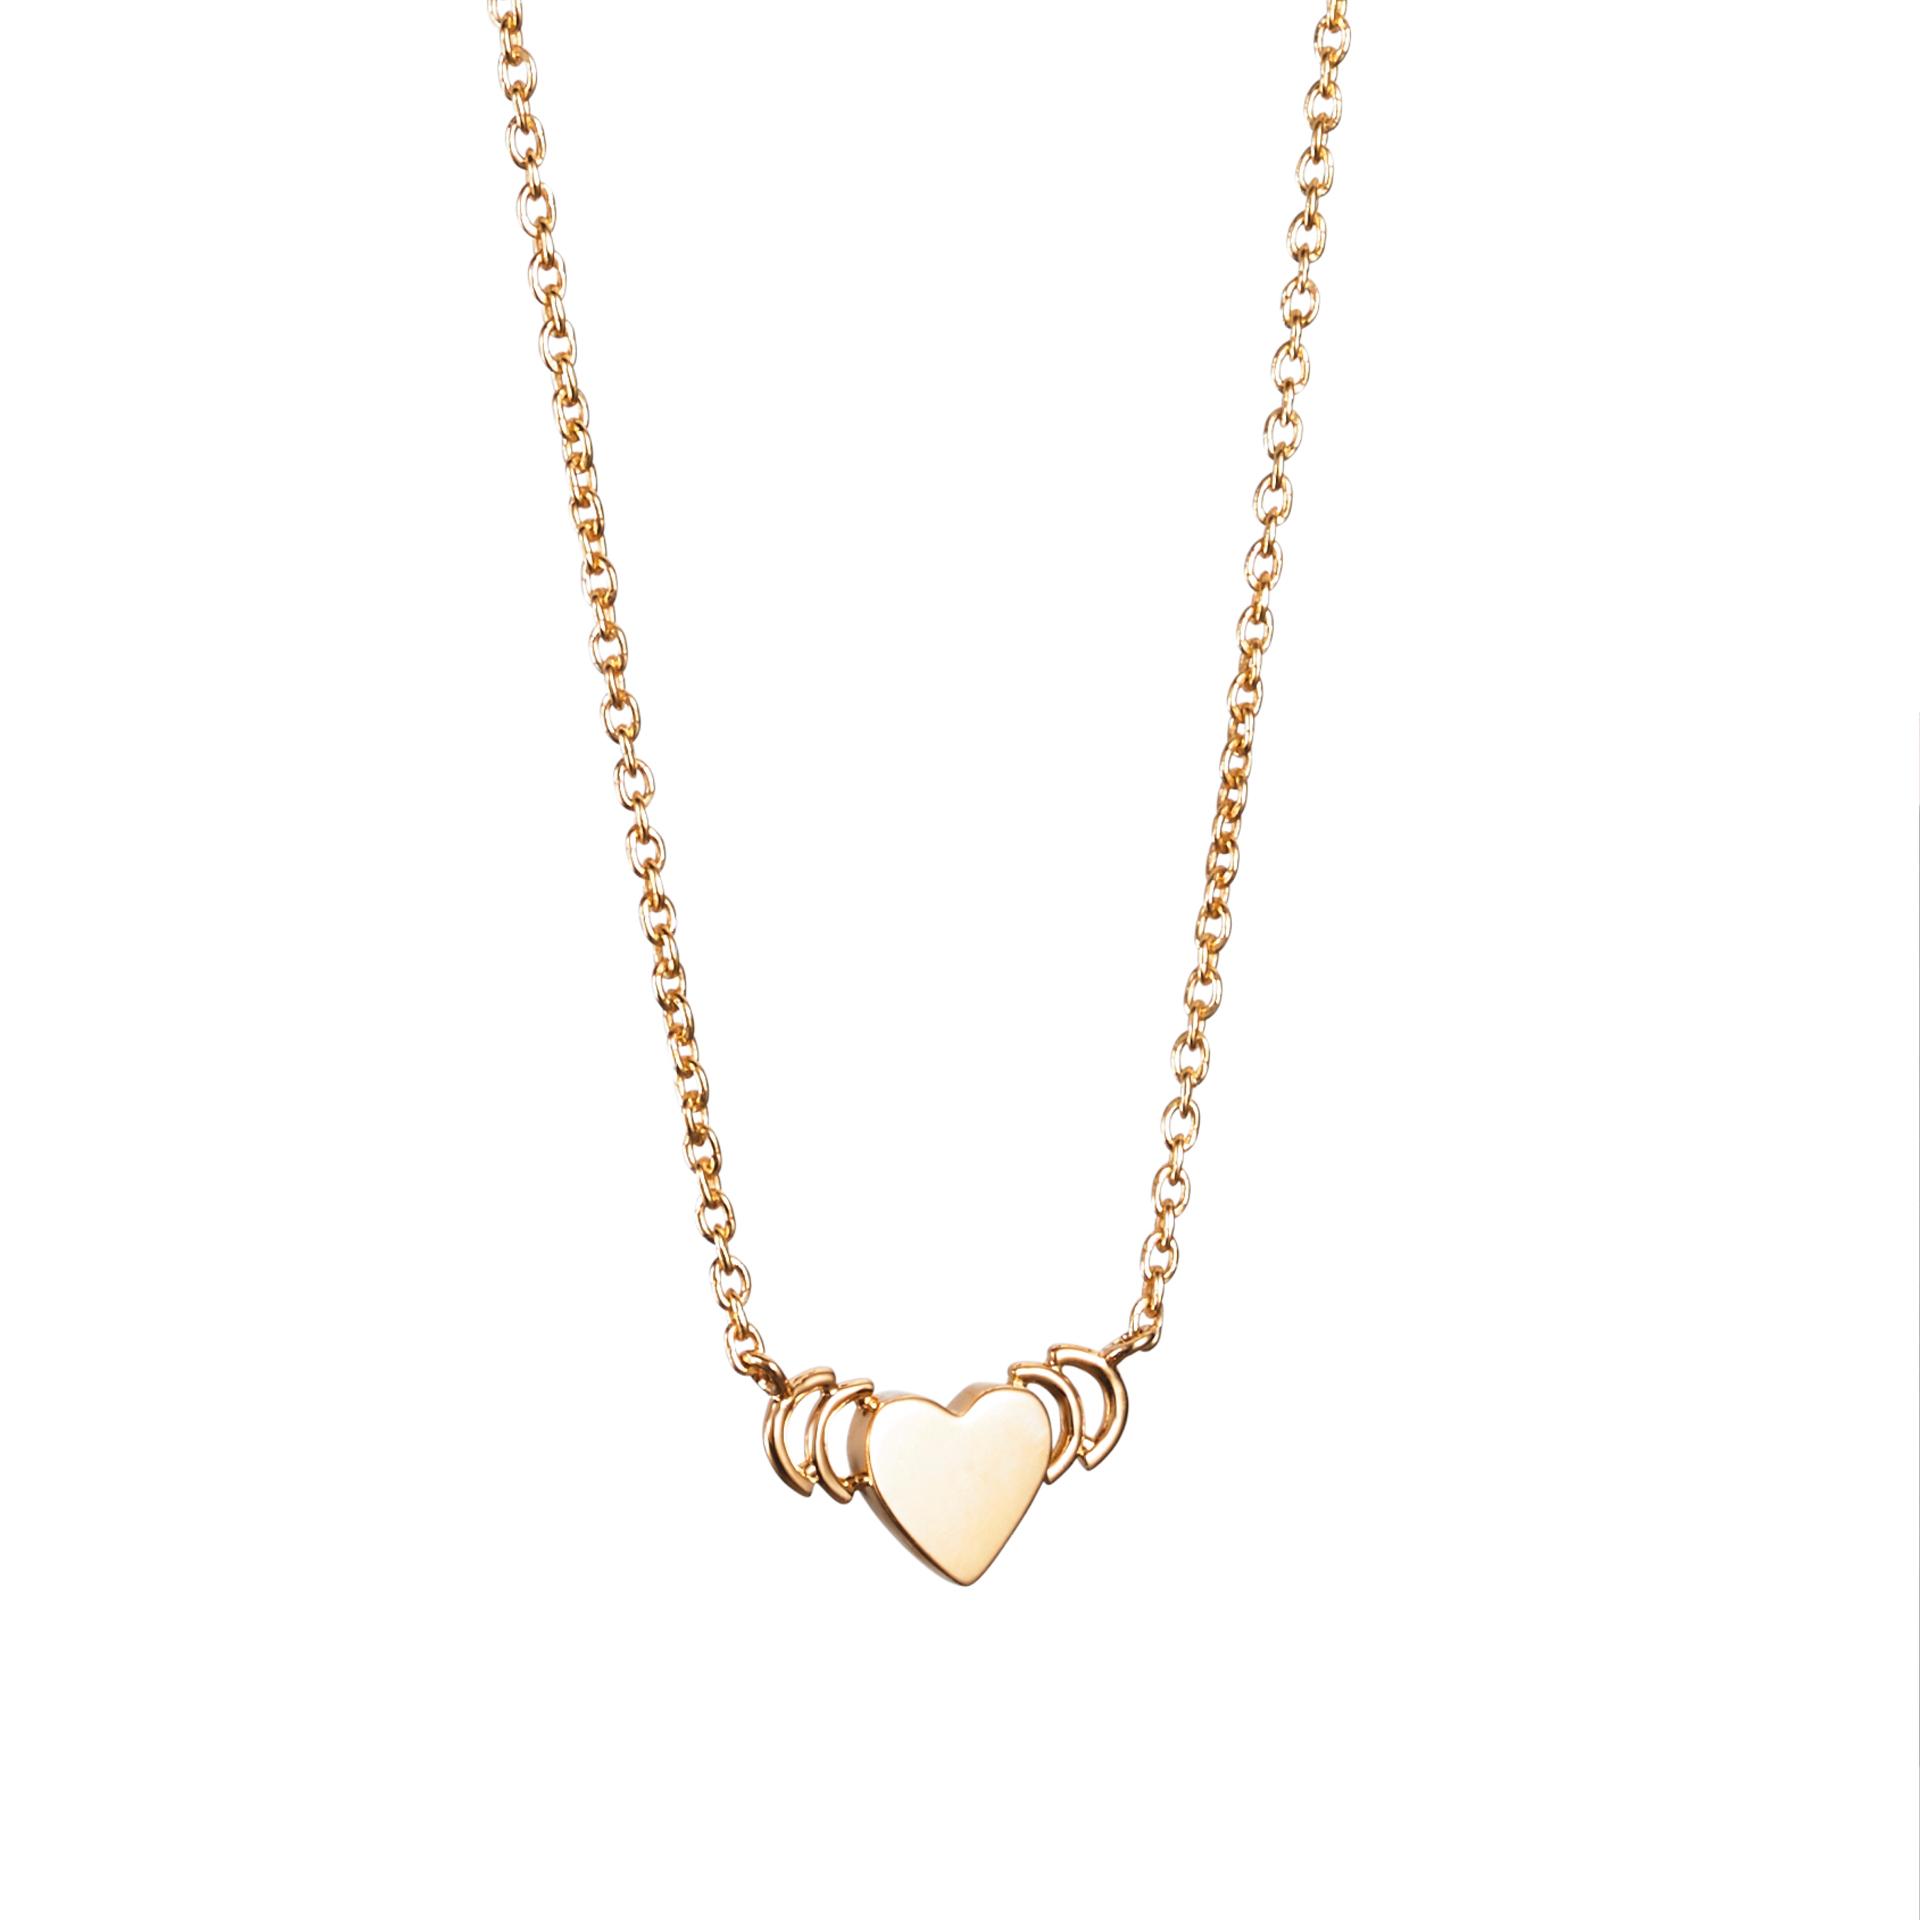 WITH LOVE NECKLACE.